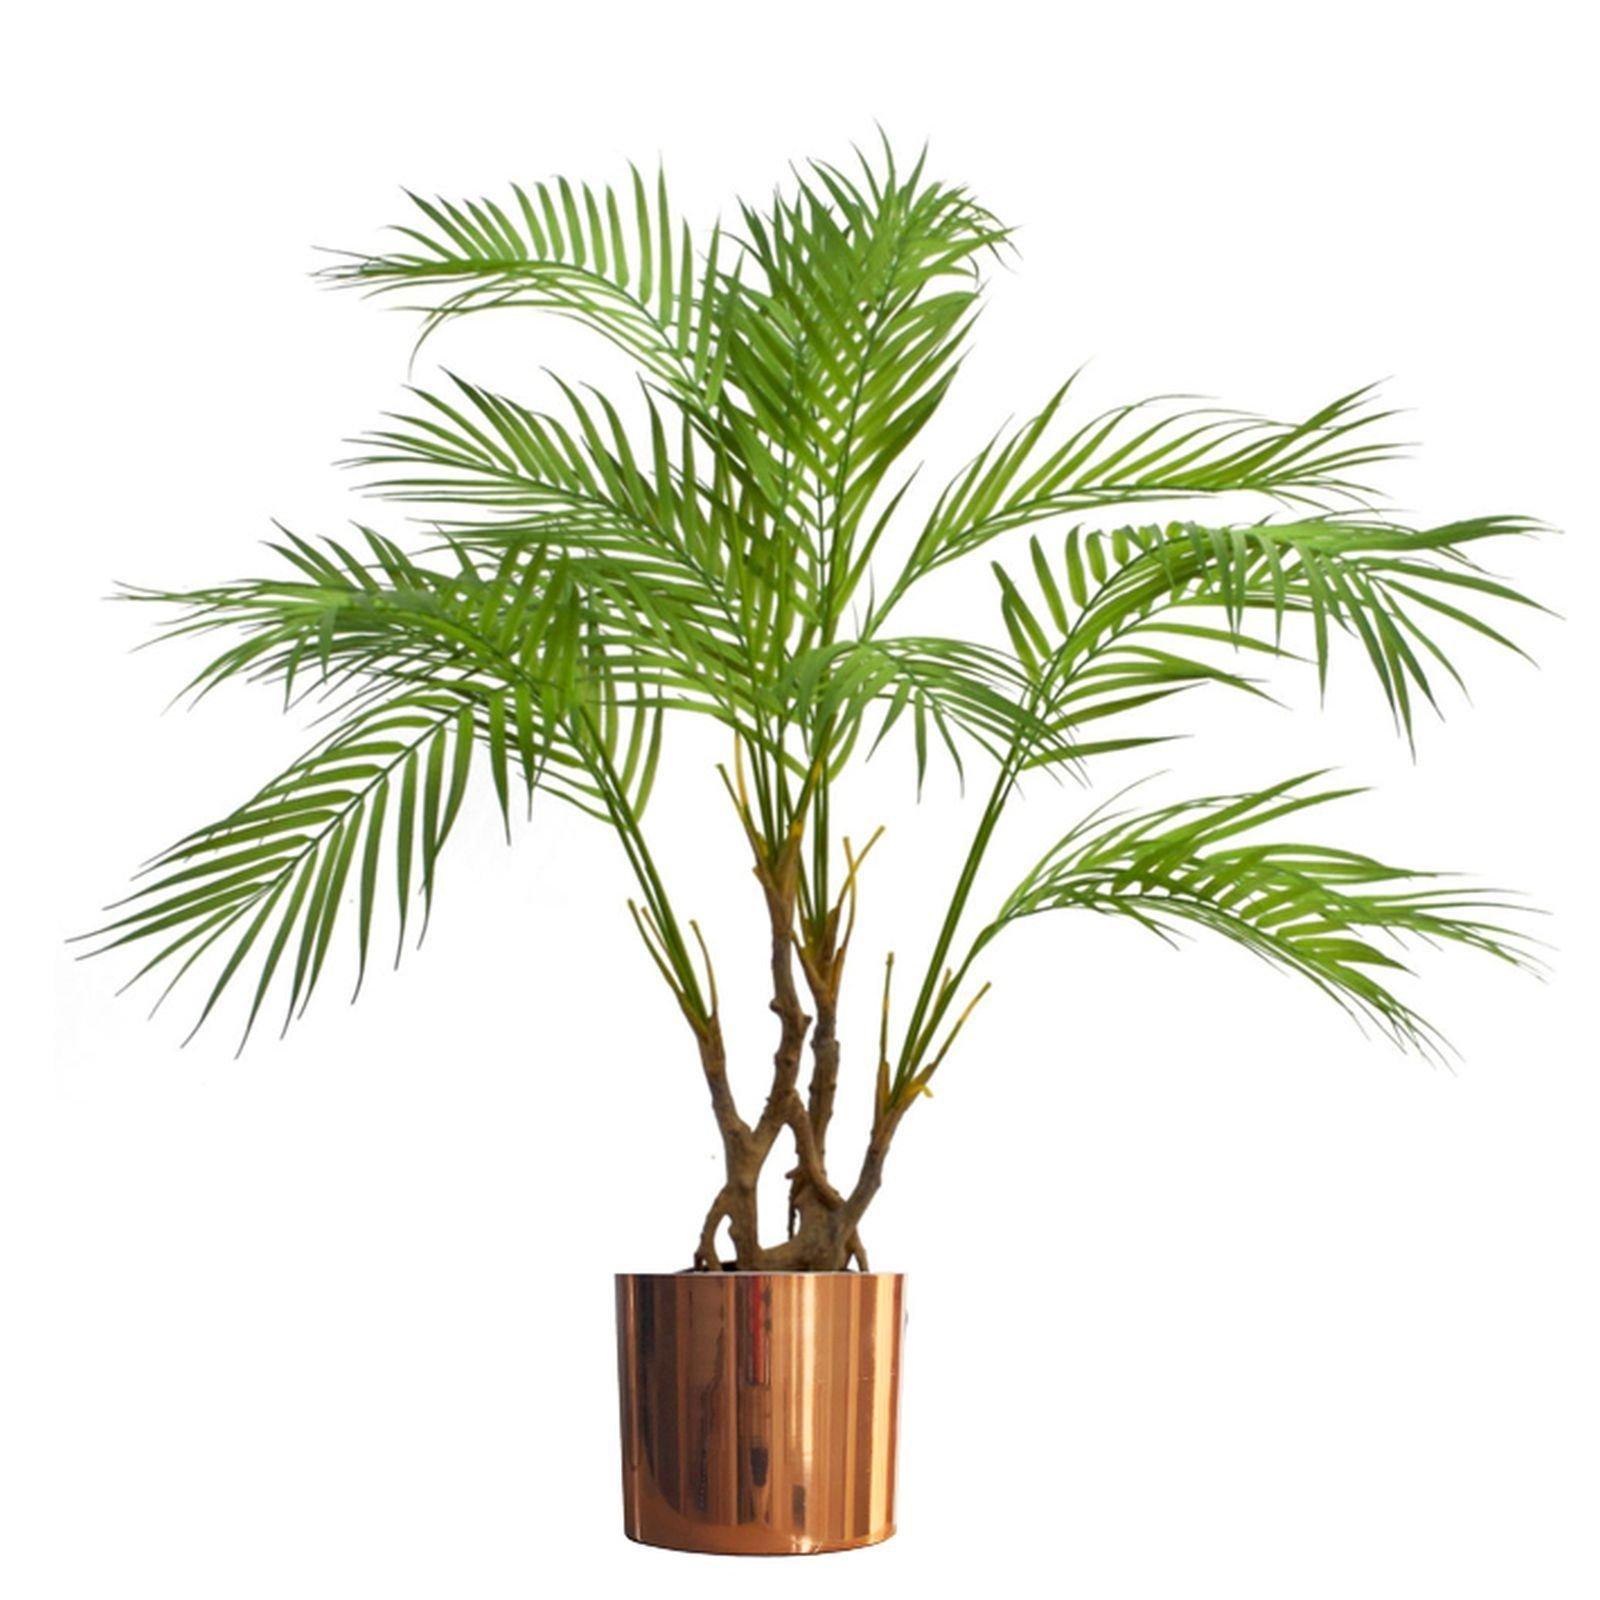 90cm Artificial Areca Palm Plant Twisted Detail Trunk with Copper Metal Plater